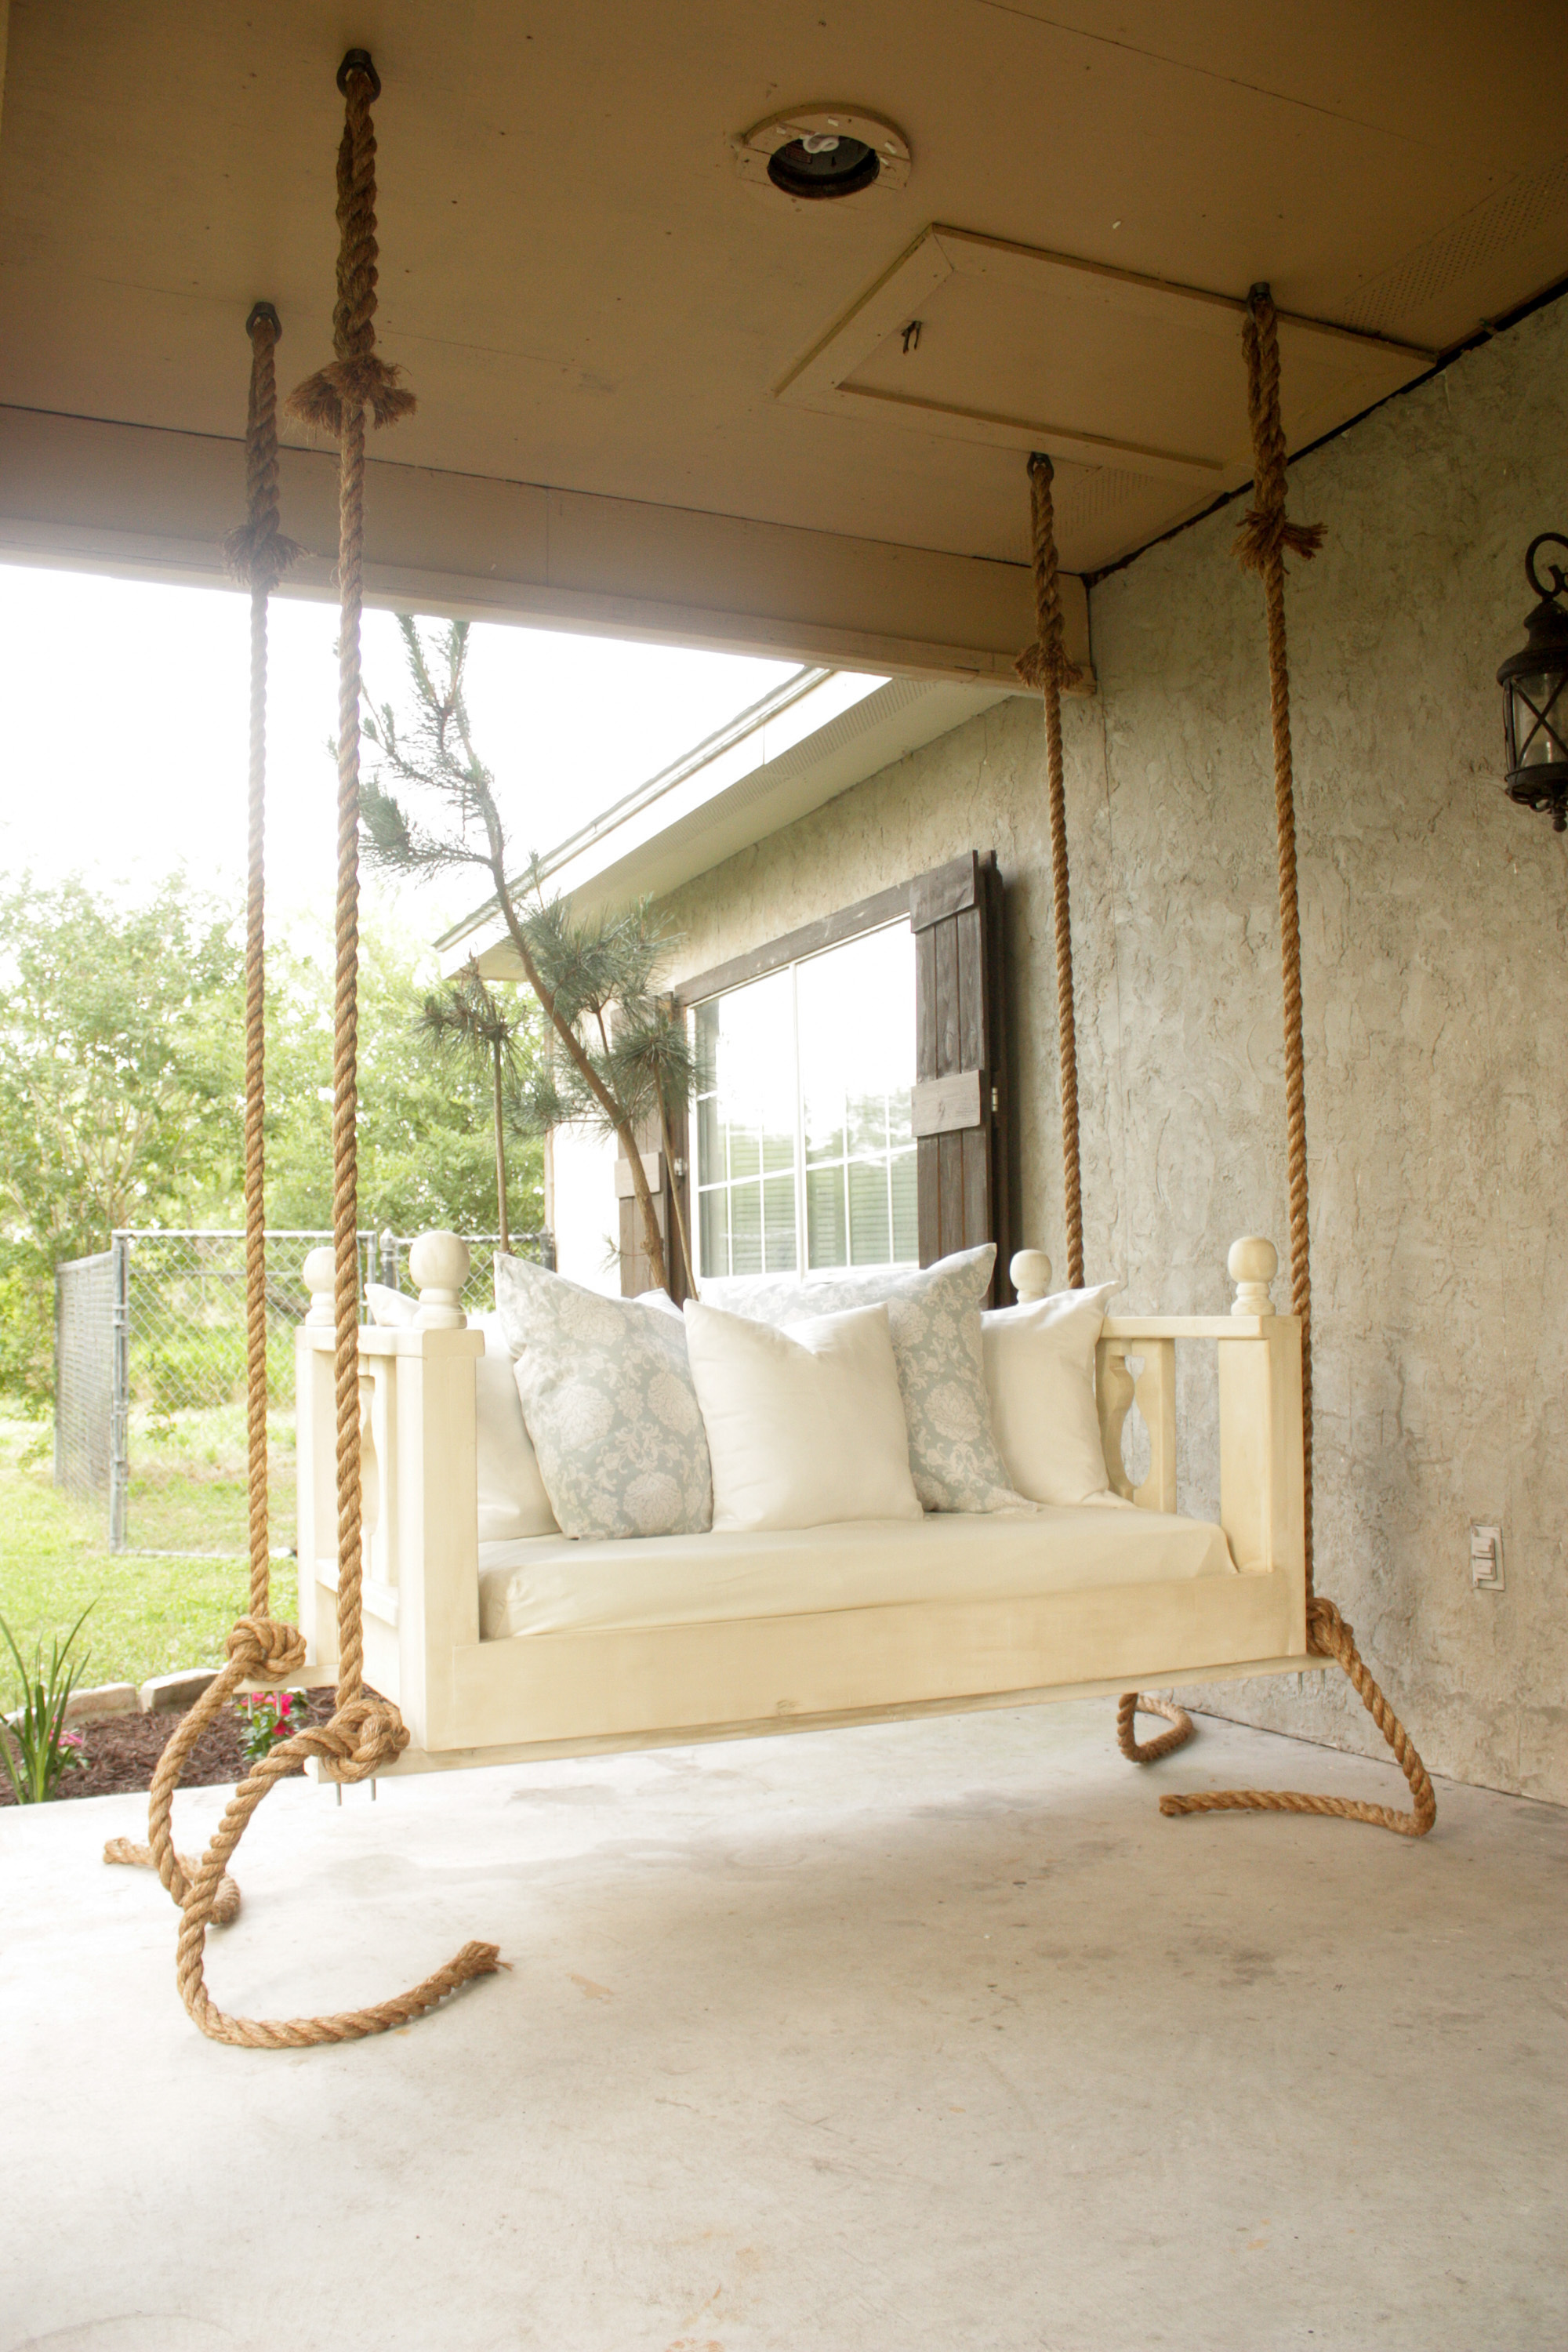 Porch Bed Swing - RYOBI Nation Projects